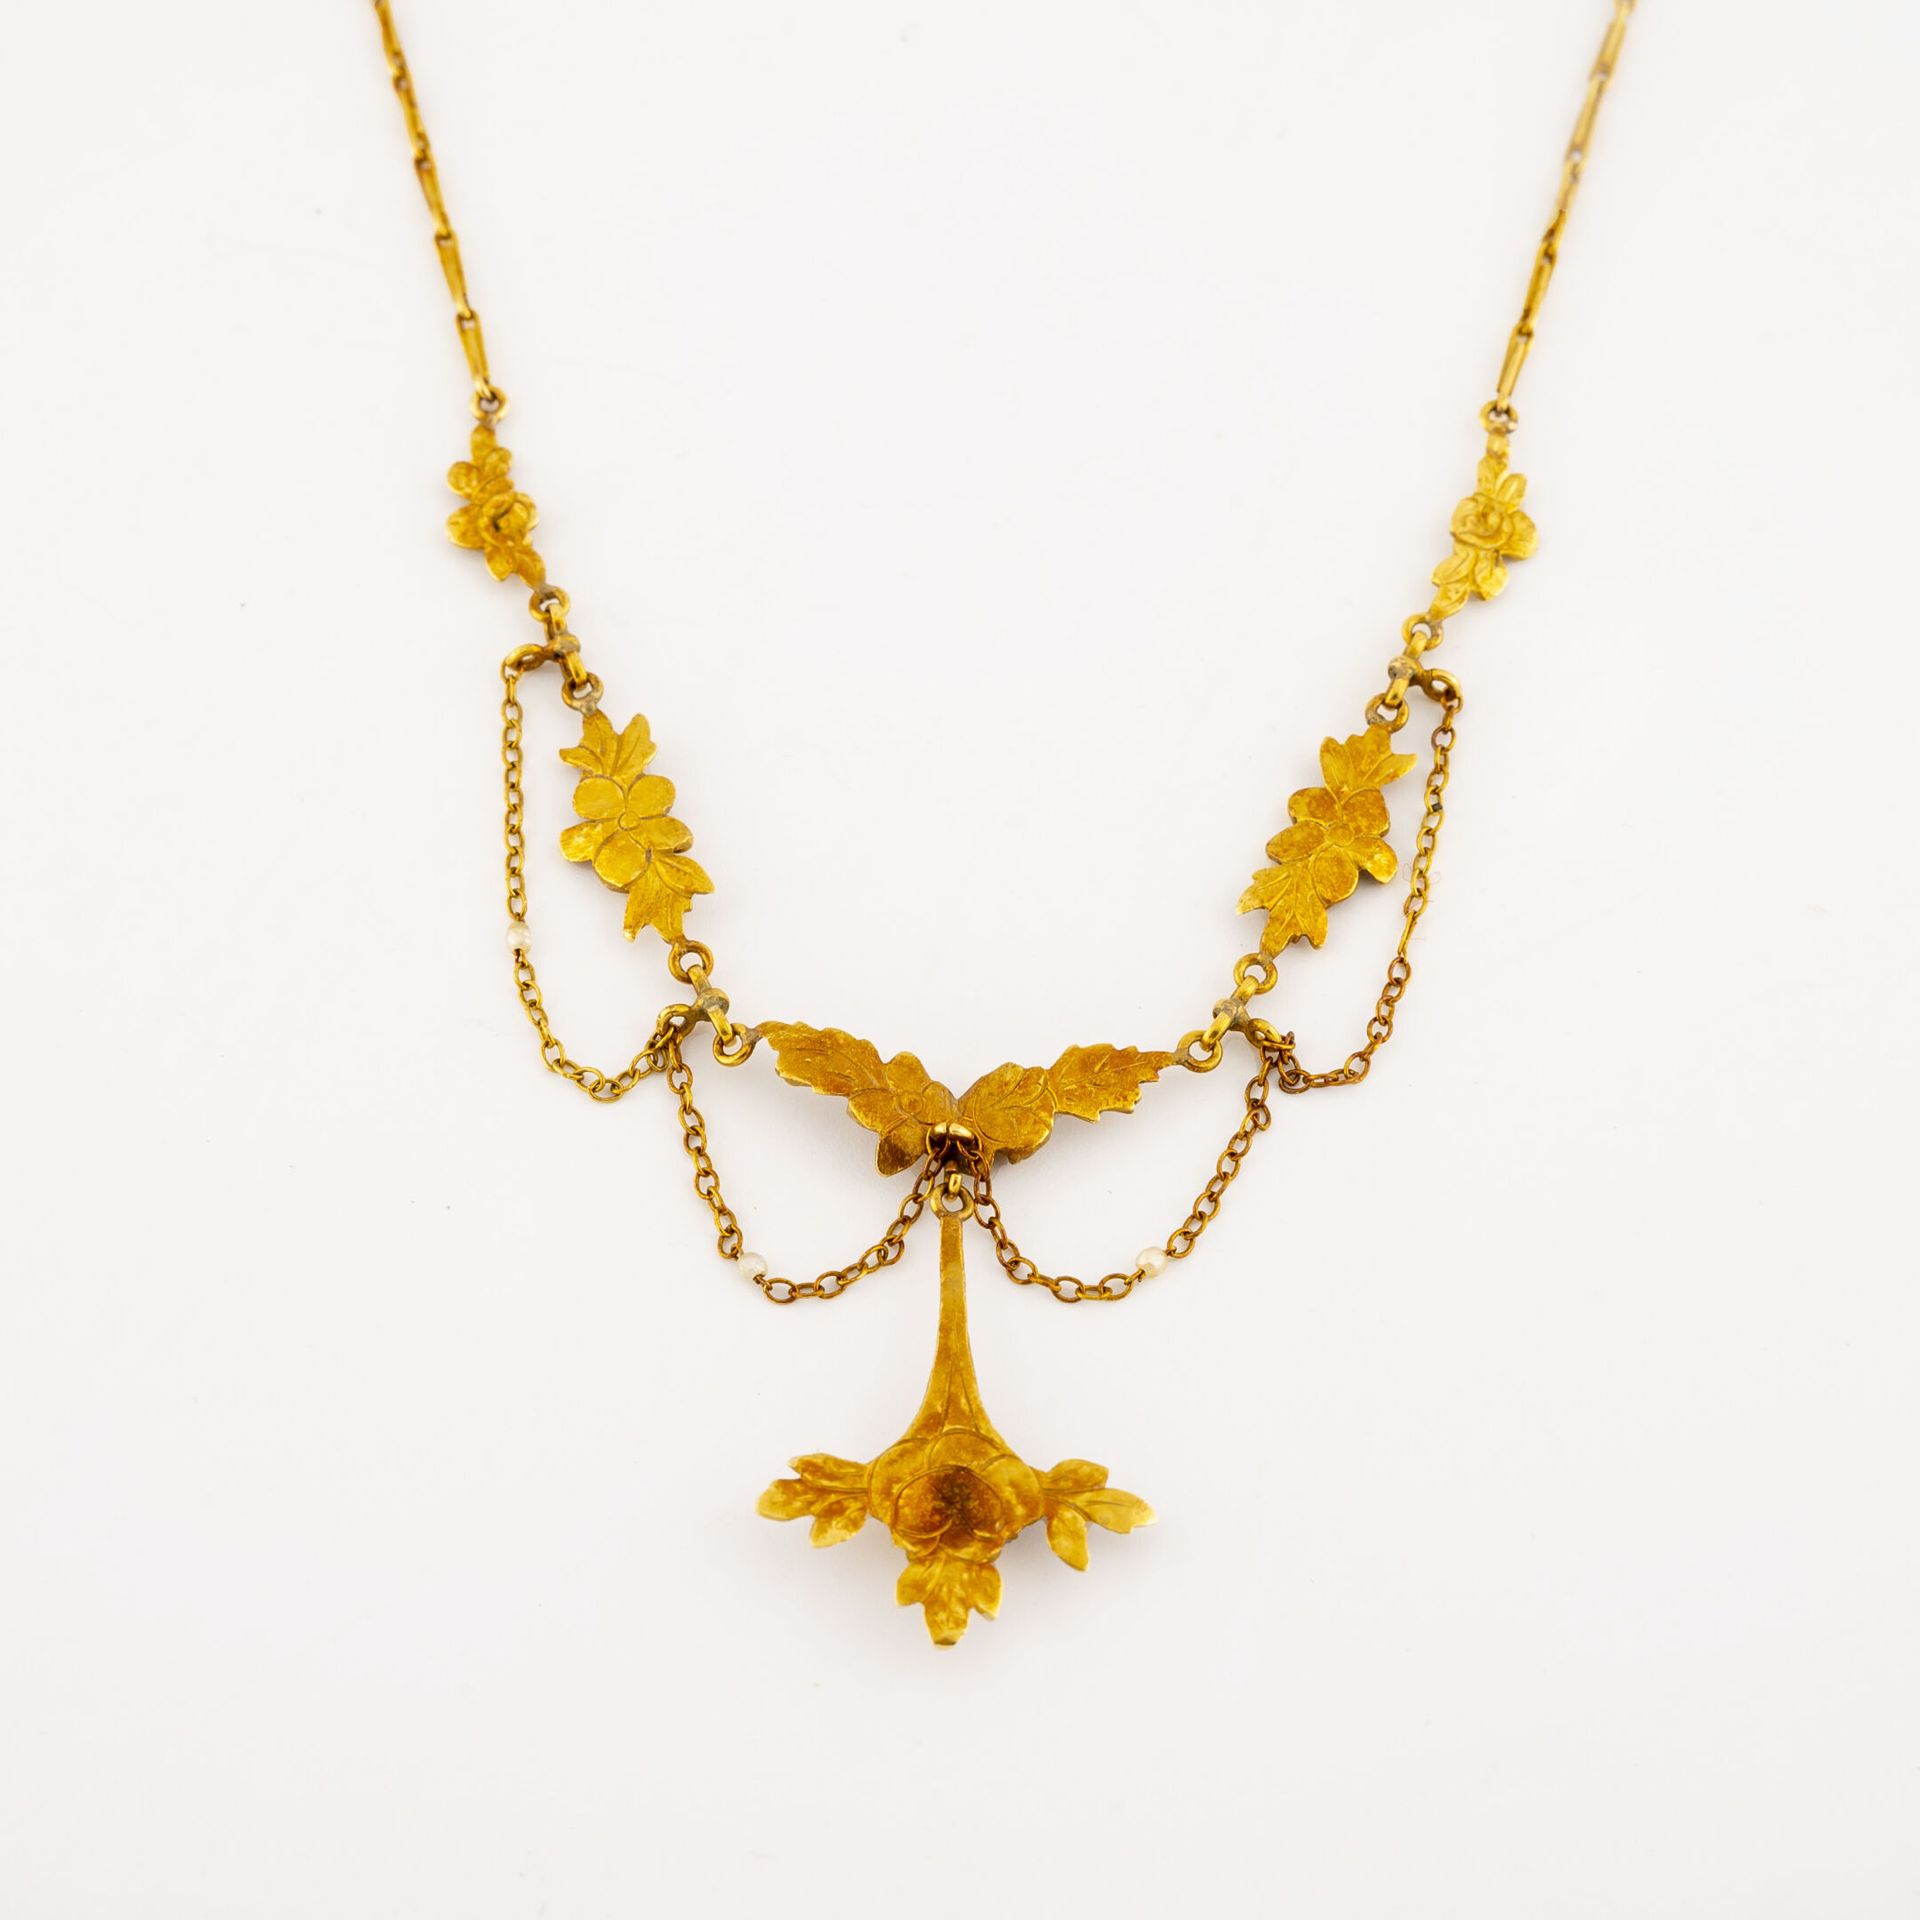 Null Necklace in yellow gold (750) with fancy mesh, the neckline with flower pat&hellip;